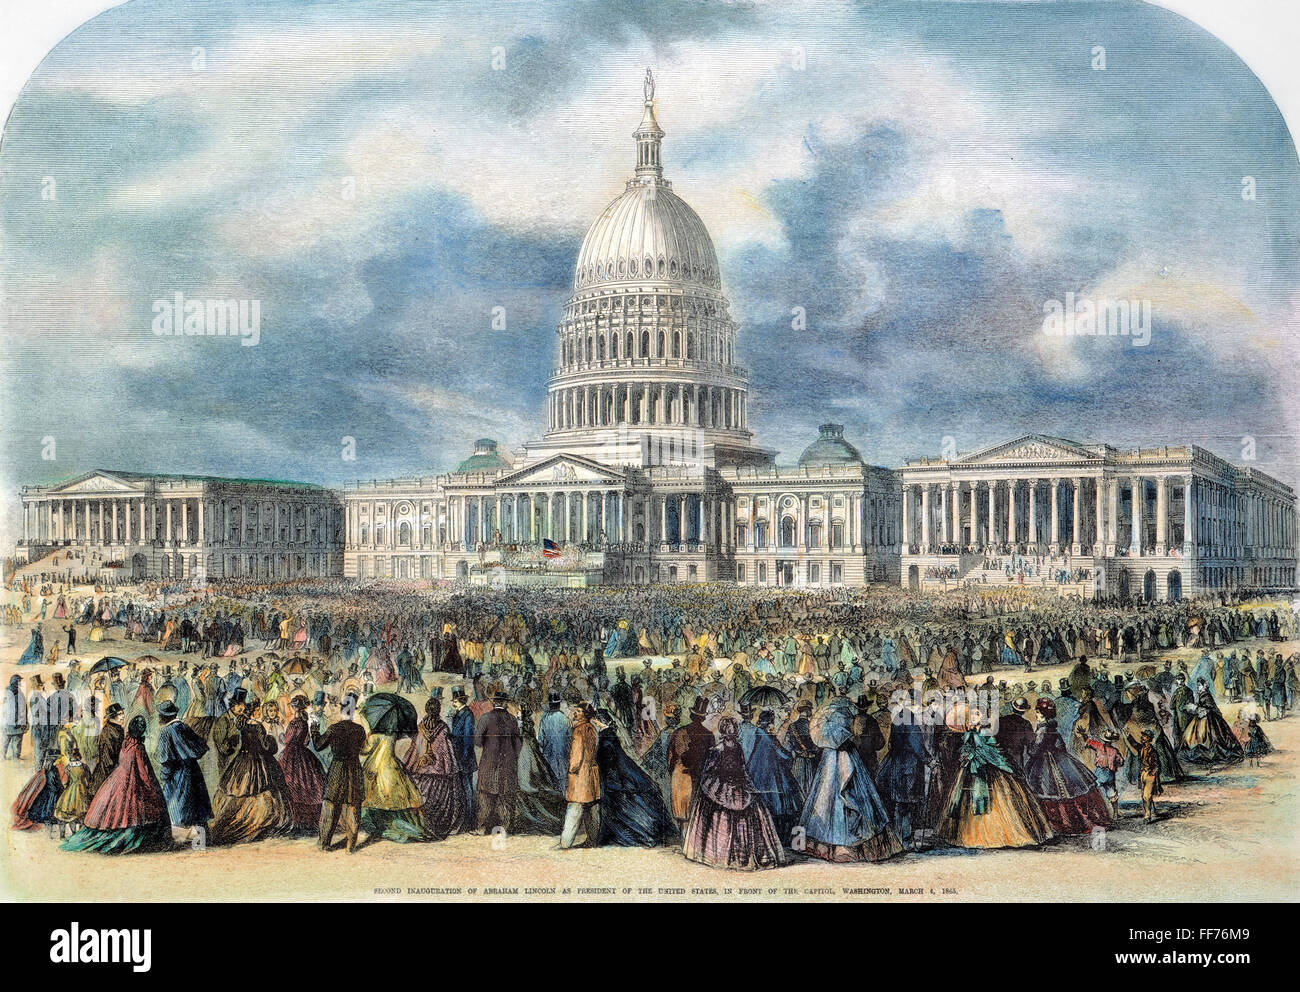 LINCOLN INAUGURATION, 1865. /nThe second inauguration of President Abraham Lincoln in Washington, D.C., 4 March 1865. Contemporary American wood engraving. Stock Photo